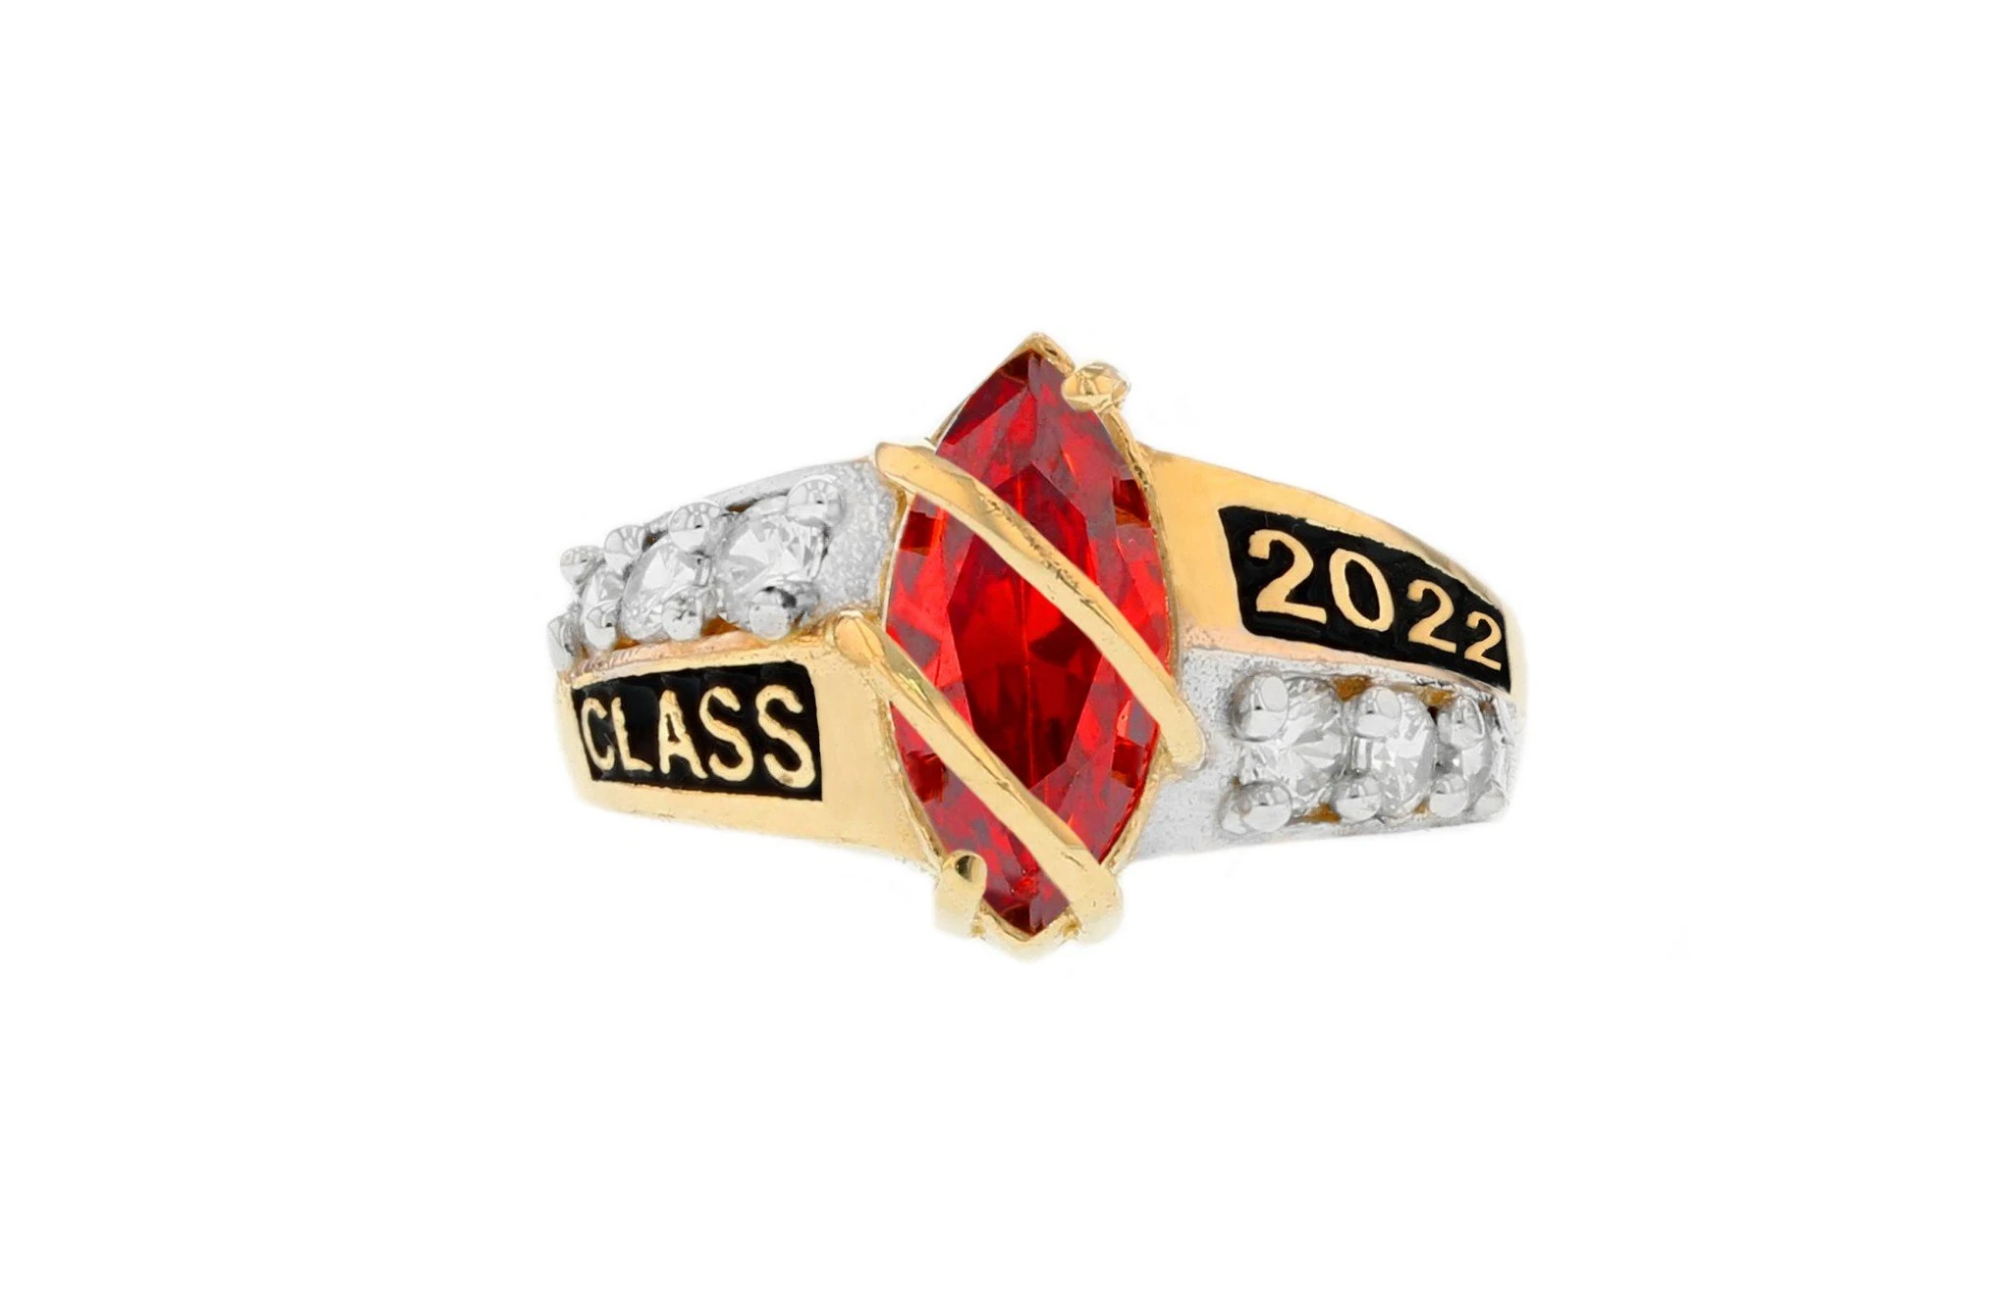 Marquise Simulated Garnet stone is set on top of a mesmerizing band